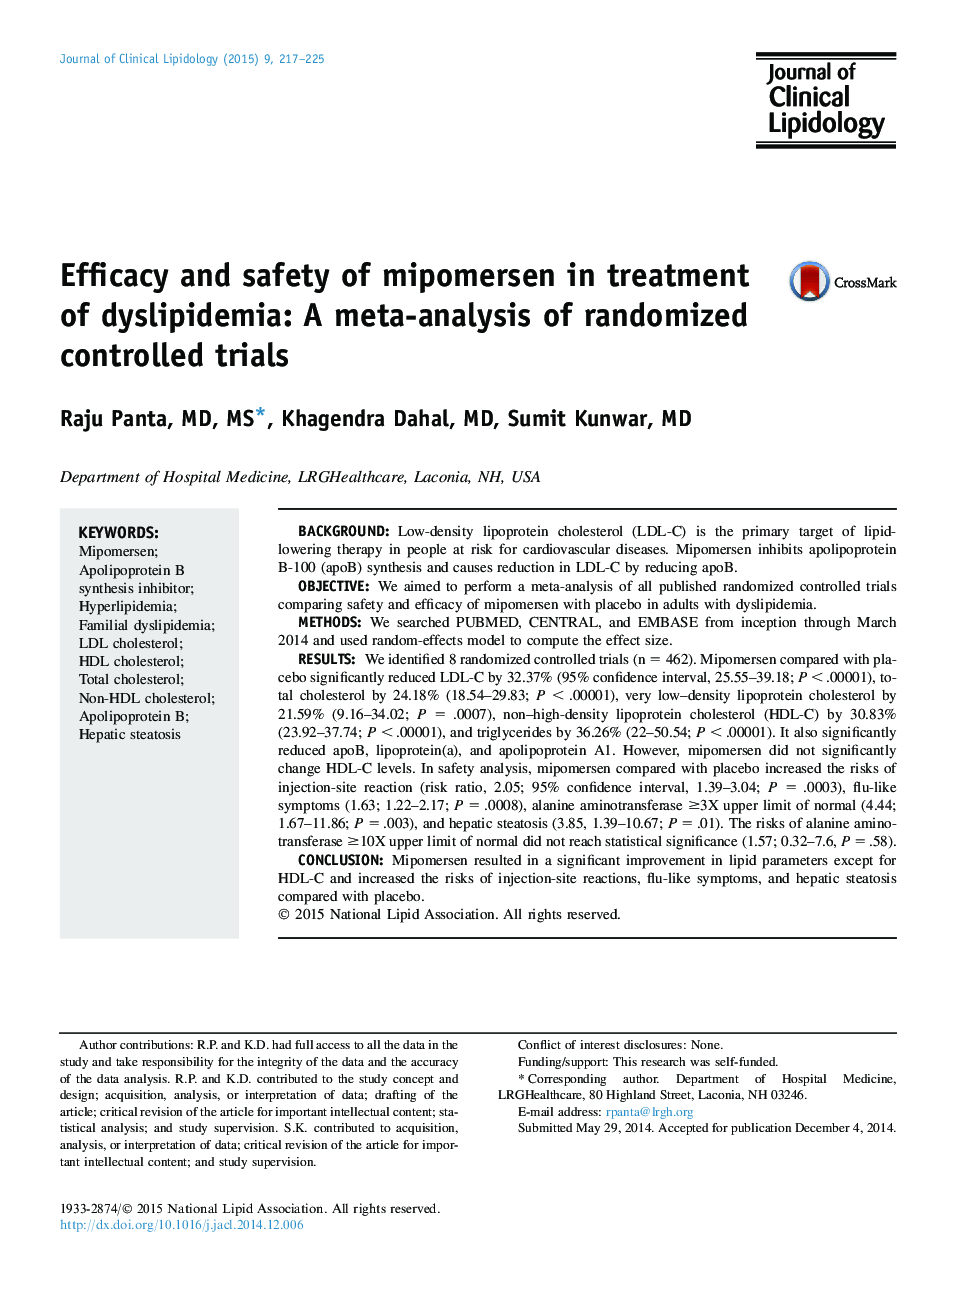 Efficacy and safety of mipomersen in treatment of dyslipidemia: A meta-analysis of randomized controlled trials